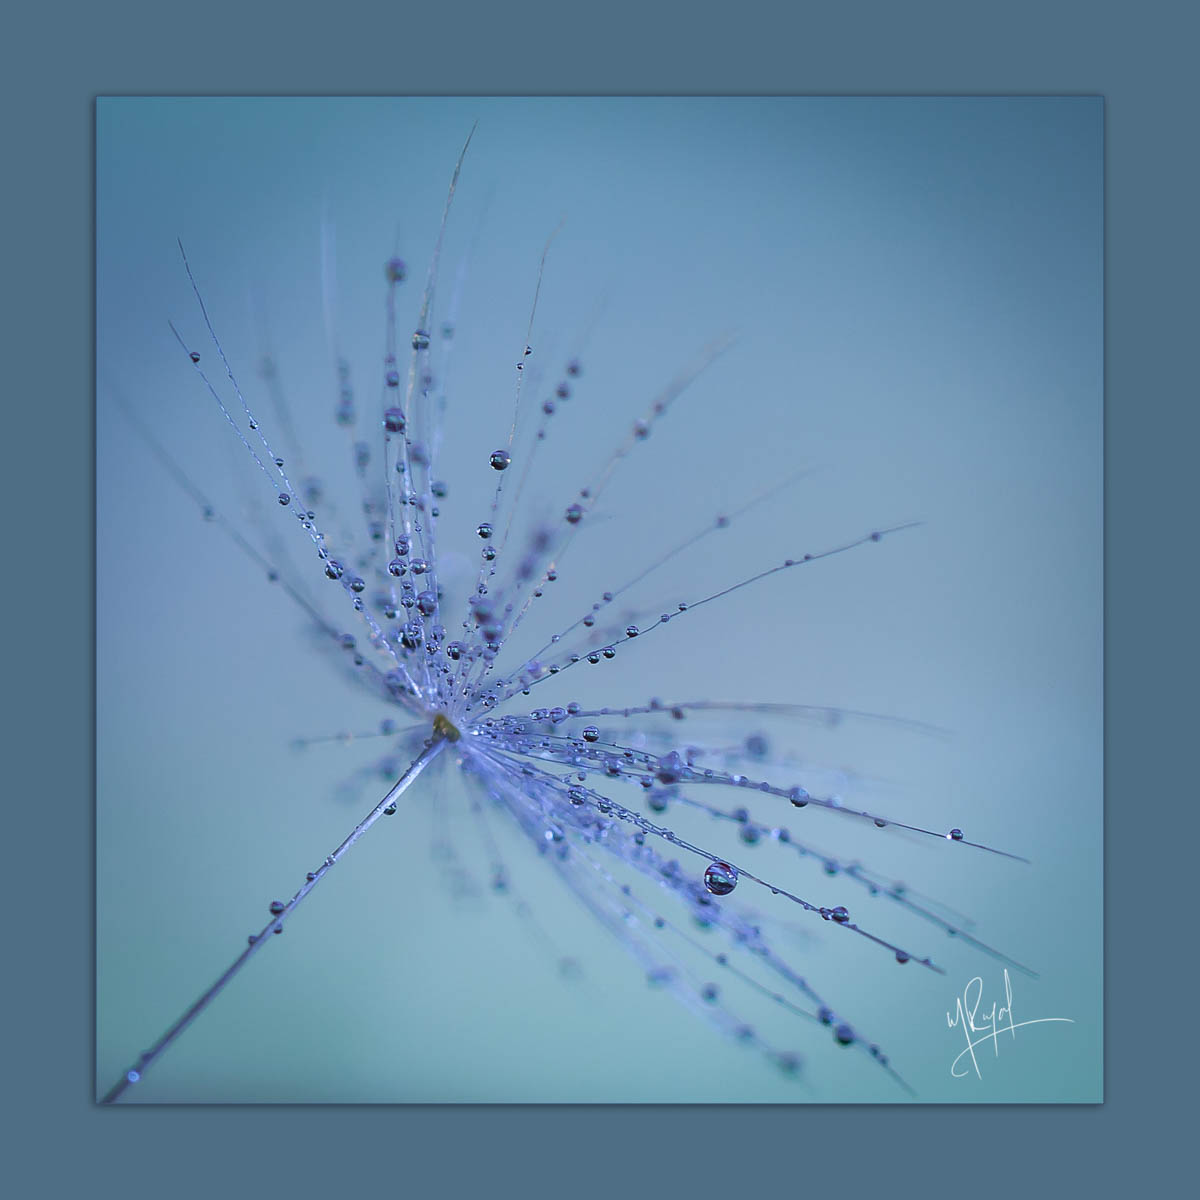 wishmaker_monica royal abstract  art single dandelion fluff seed on blue background with LED light and shallow depth of field